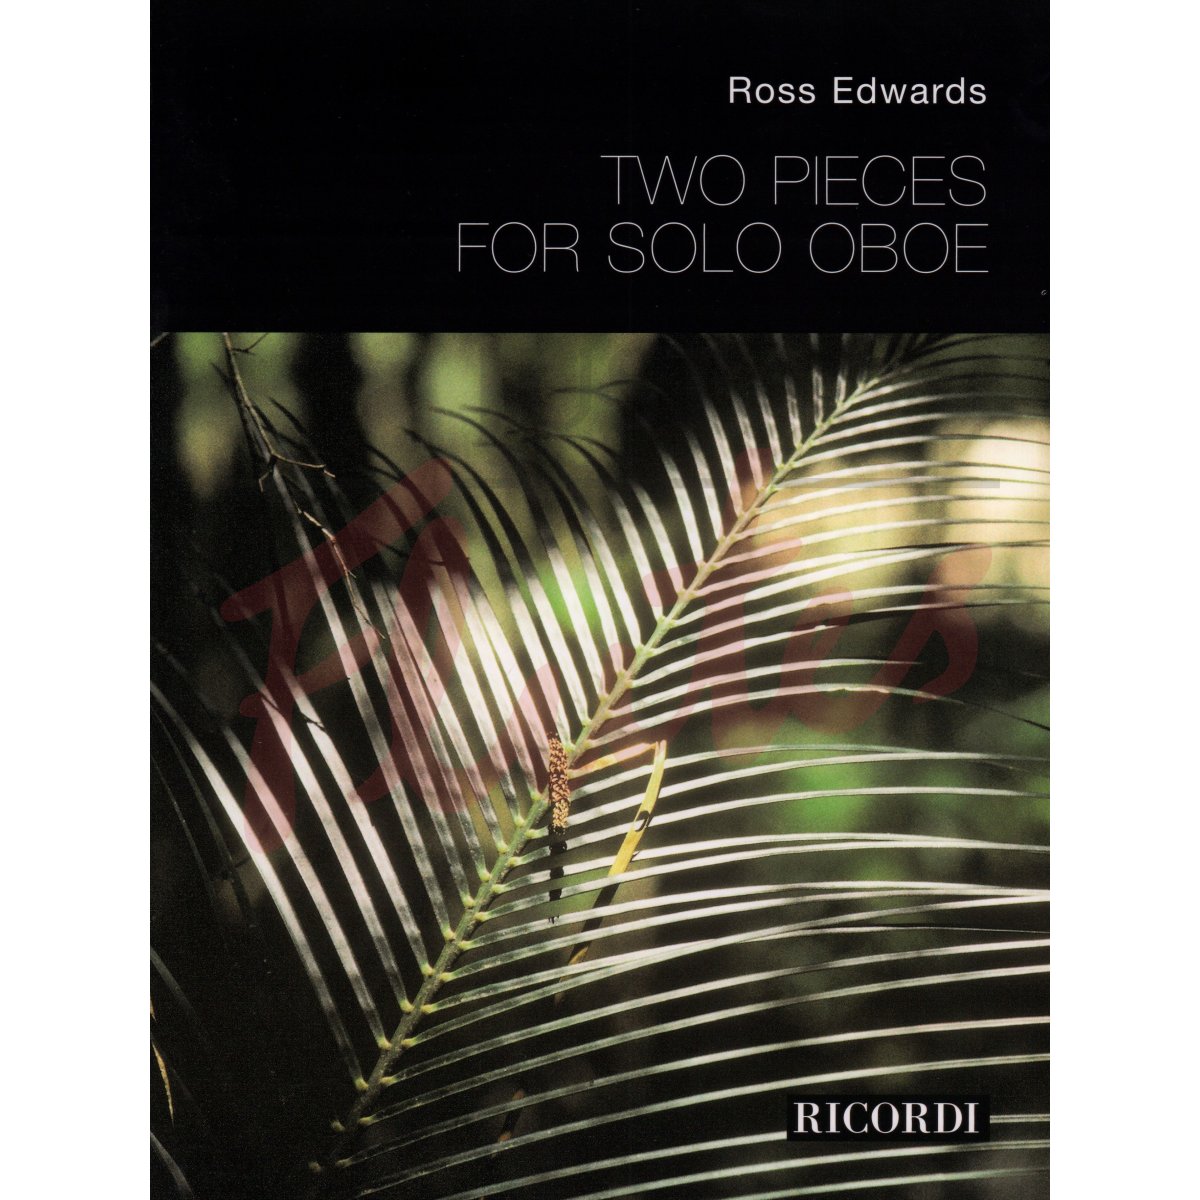 Two Pieces for Solo Oboe